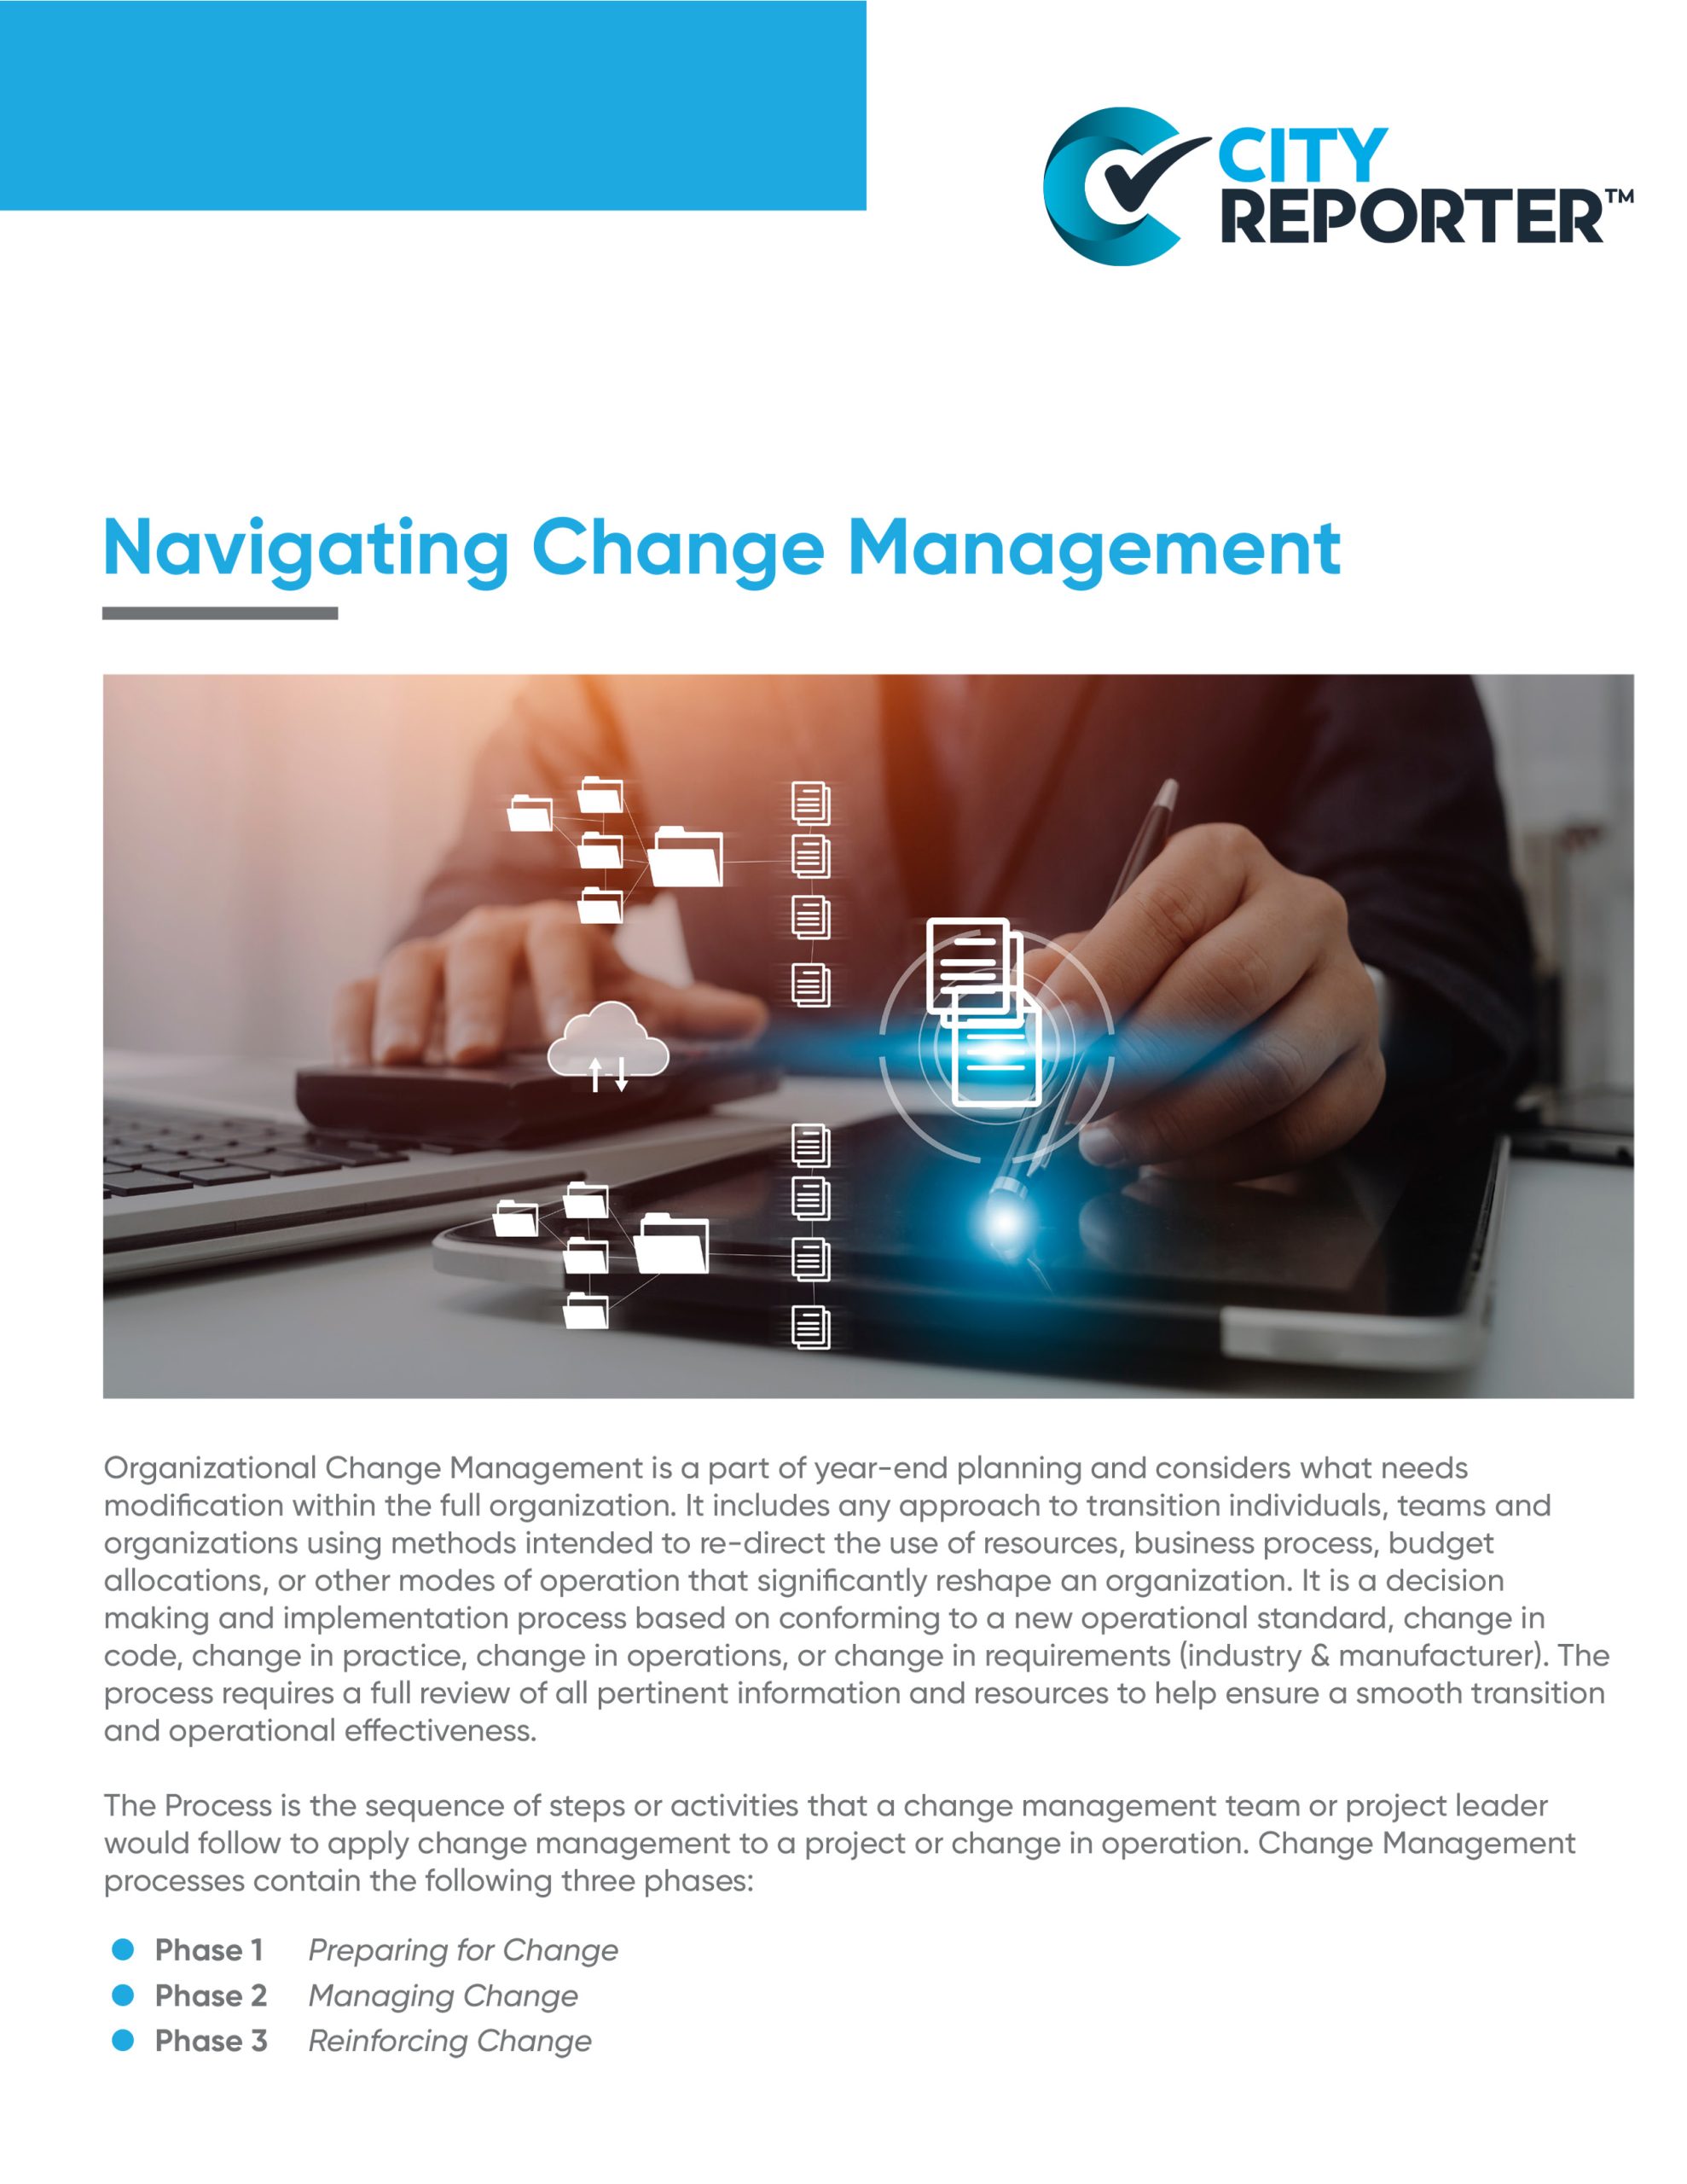 The first page of CityReporter's document - Change Management